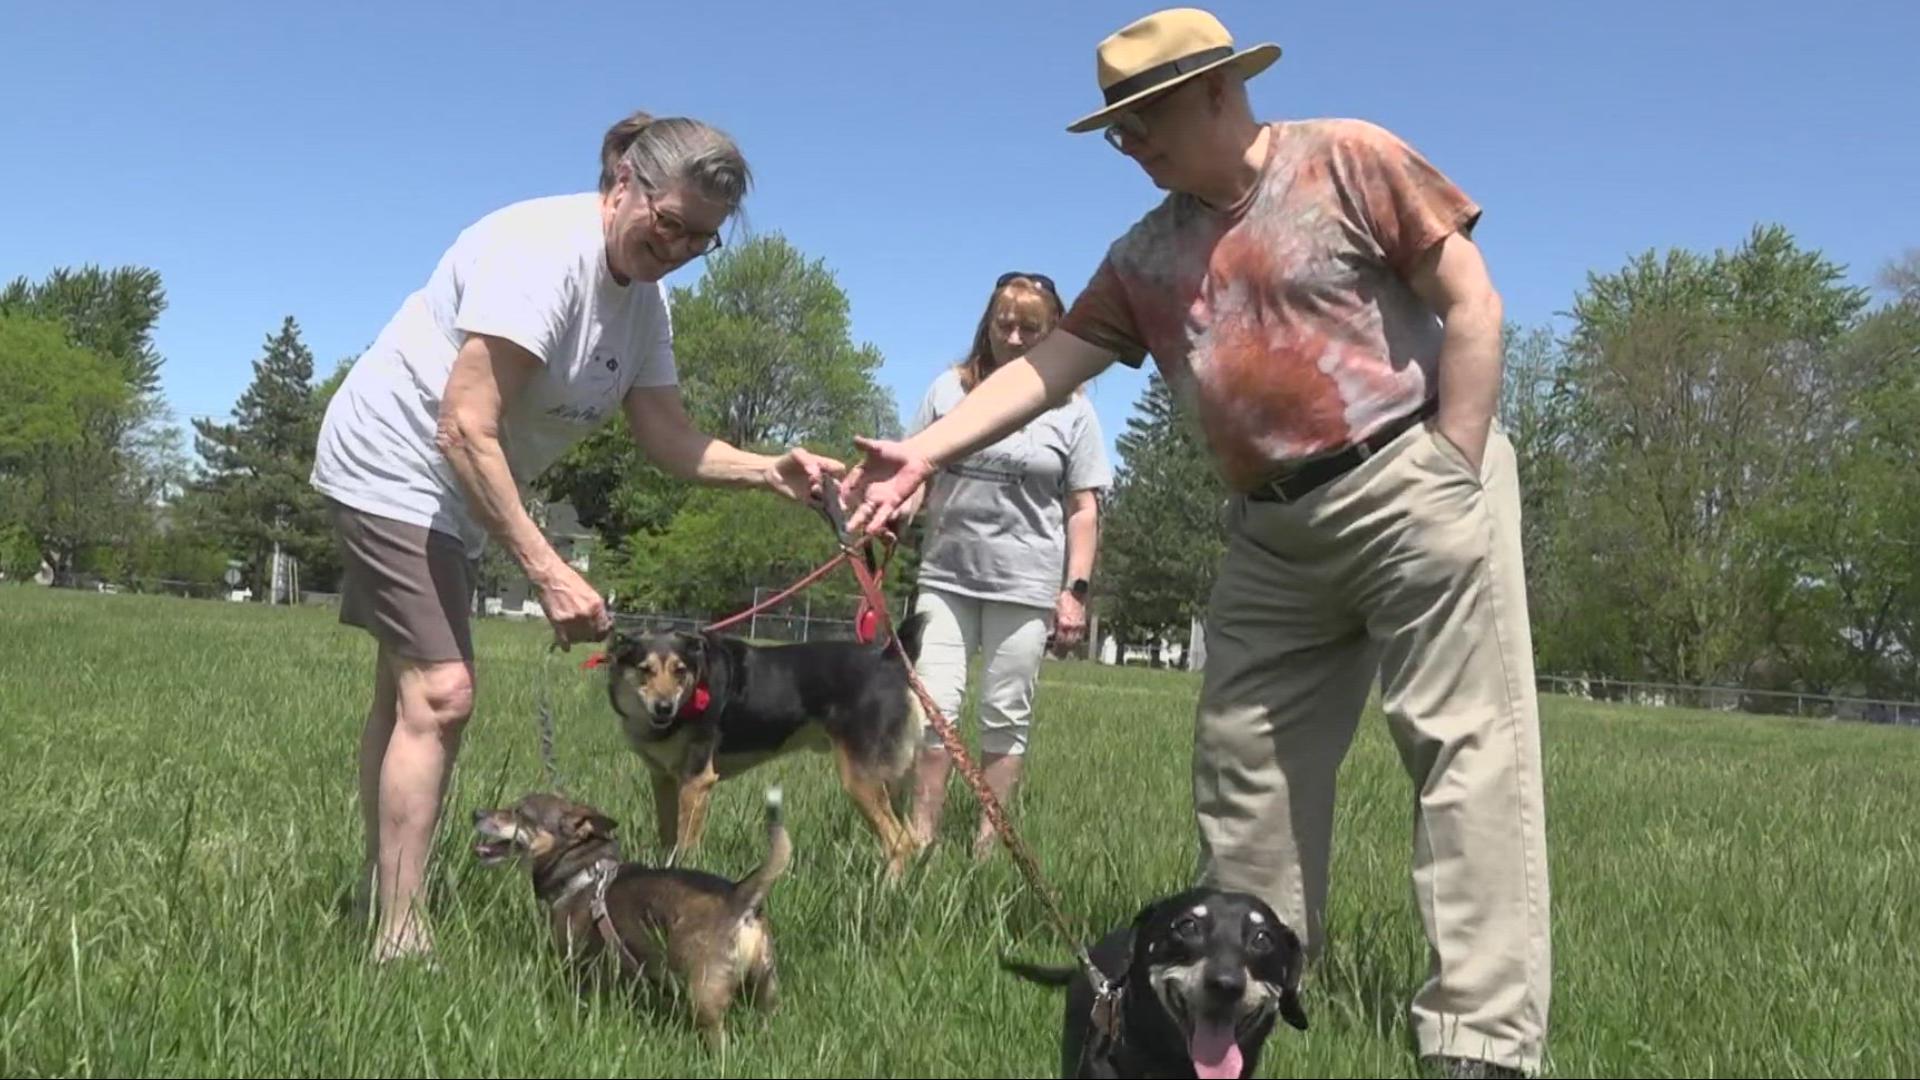 On Tuesday, Bowling Green City Council approved the lease of the northern portion of Ridge Park to become a city dog park.